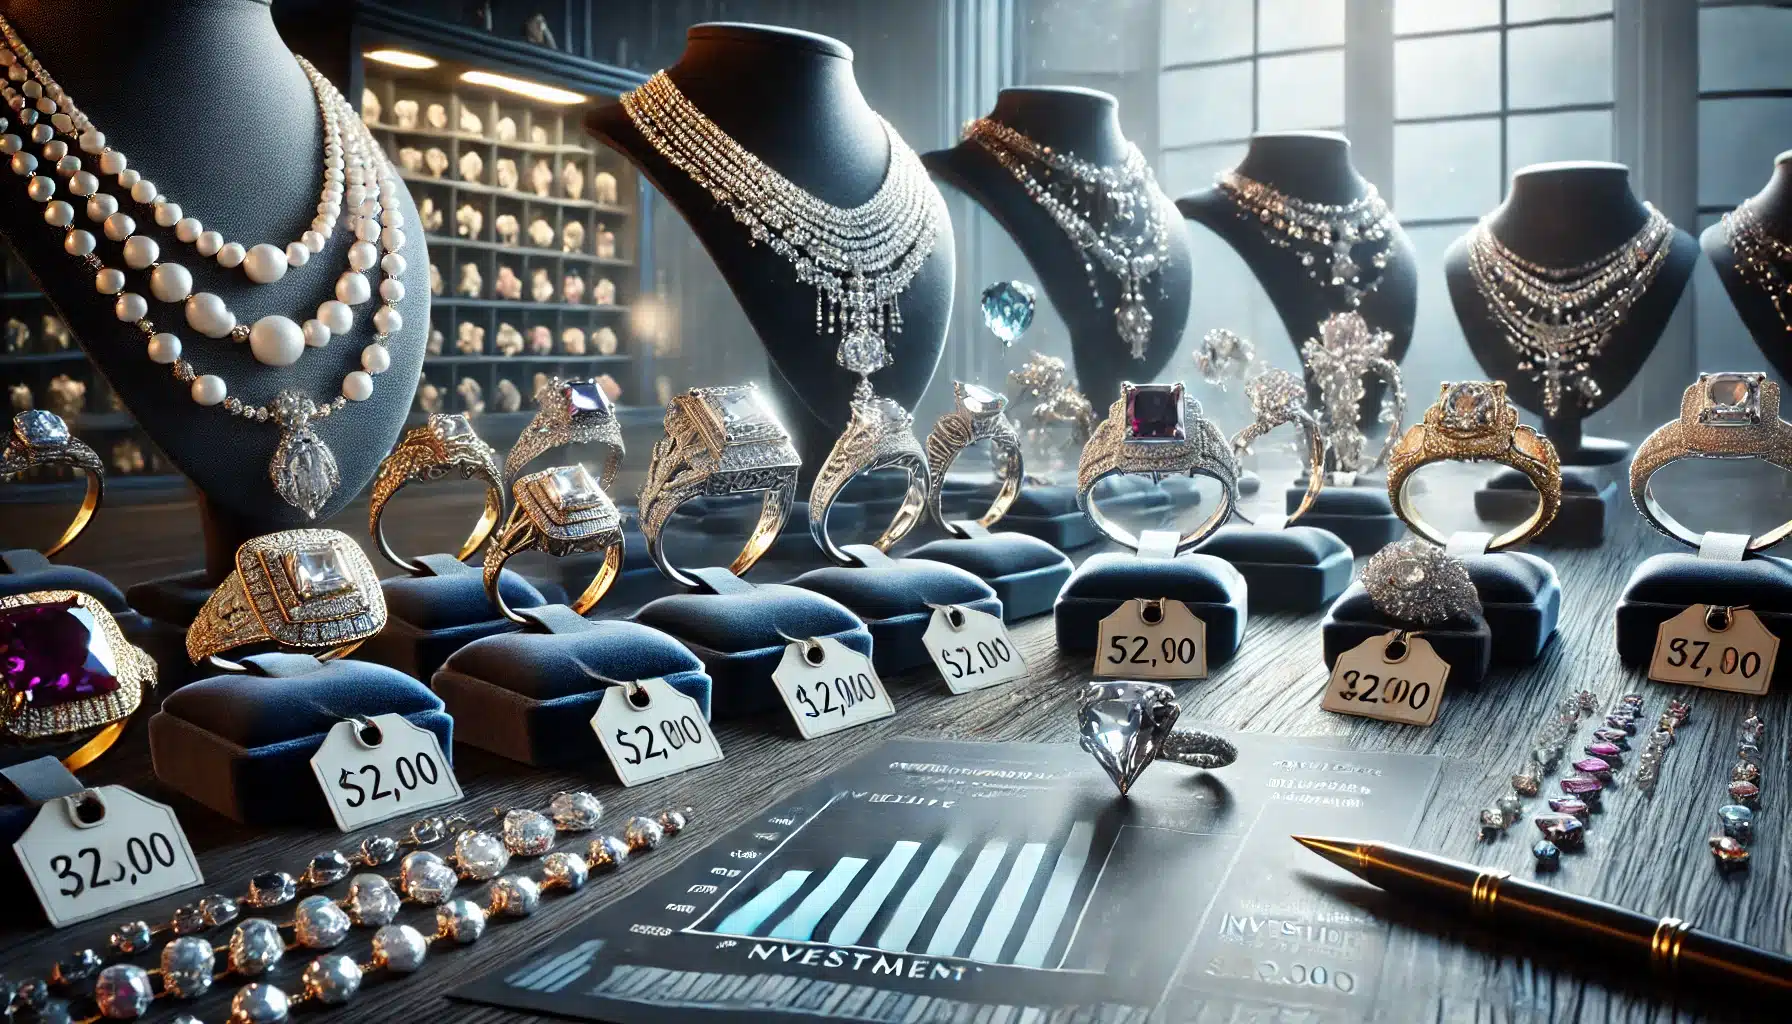 An elegant display of various types of jewelry, including rings, necklaces, bracelets, and earrings, with price tags and investment charts in the background, illustrating the concept of investing in the jewelry market.